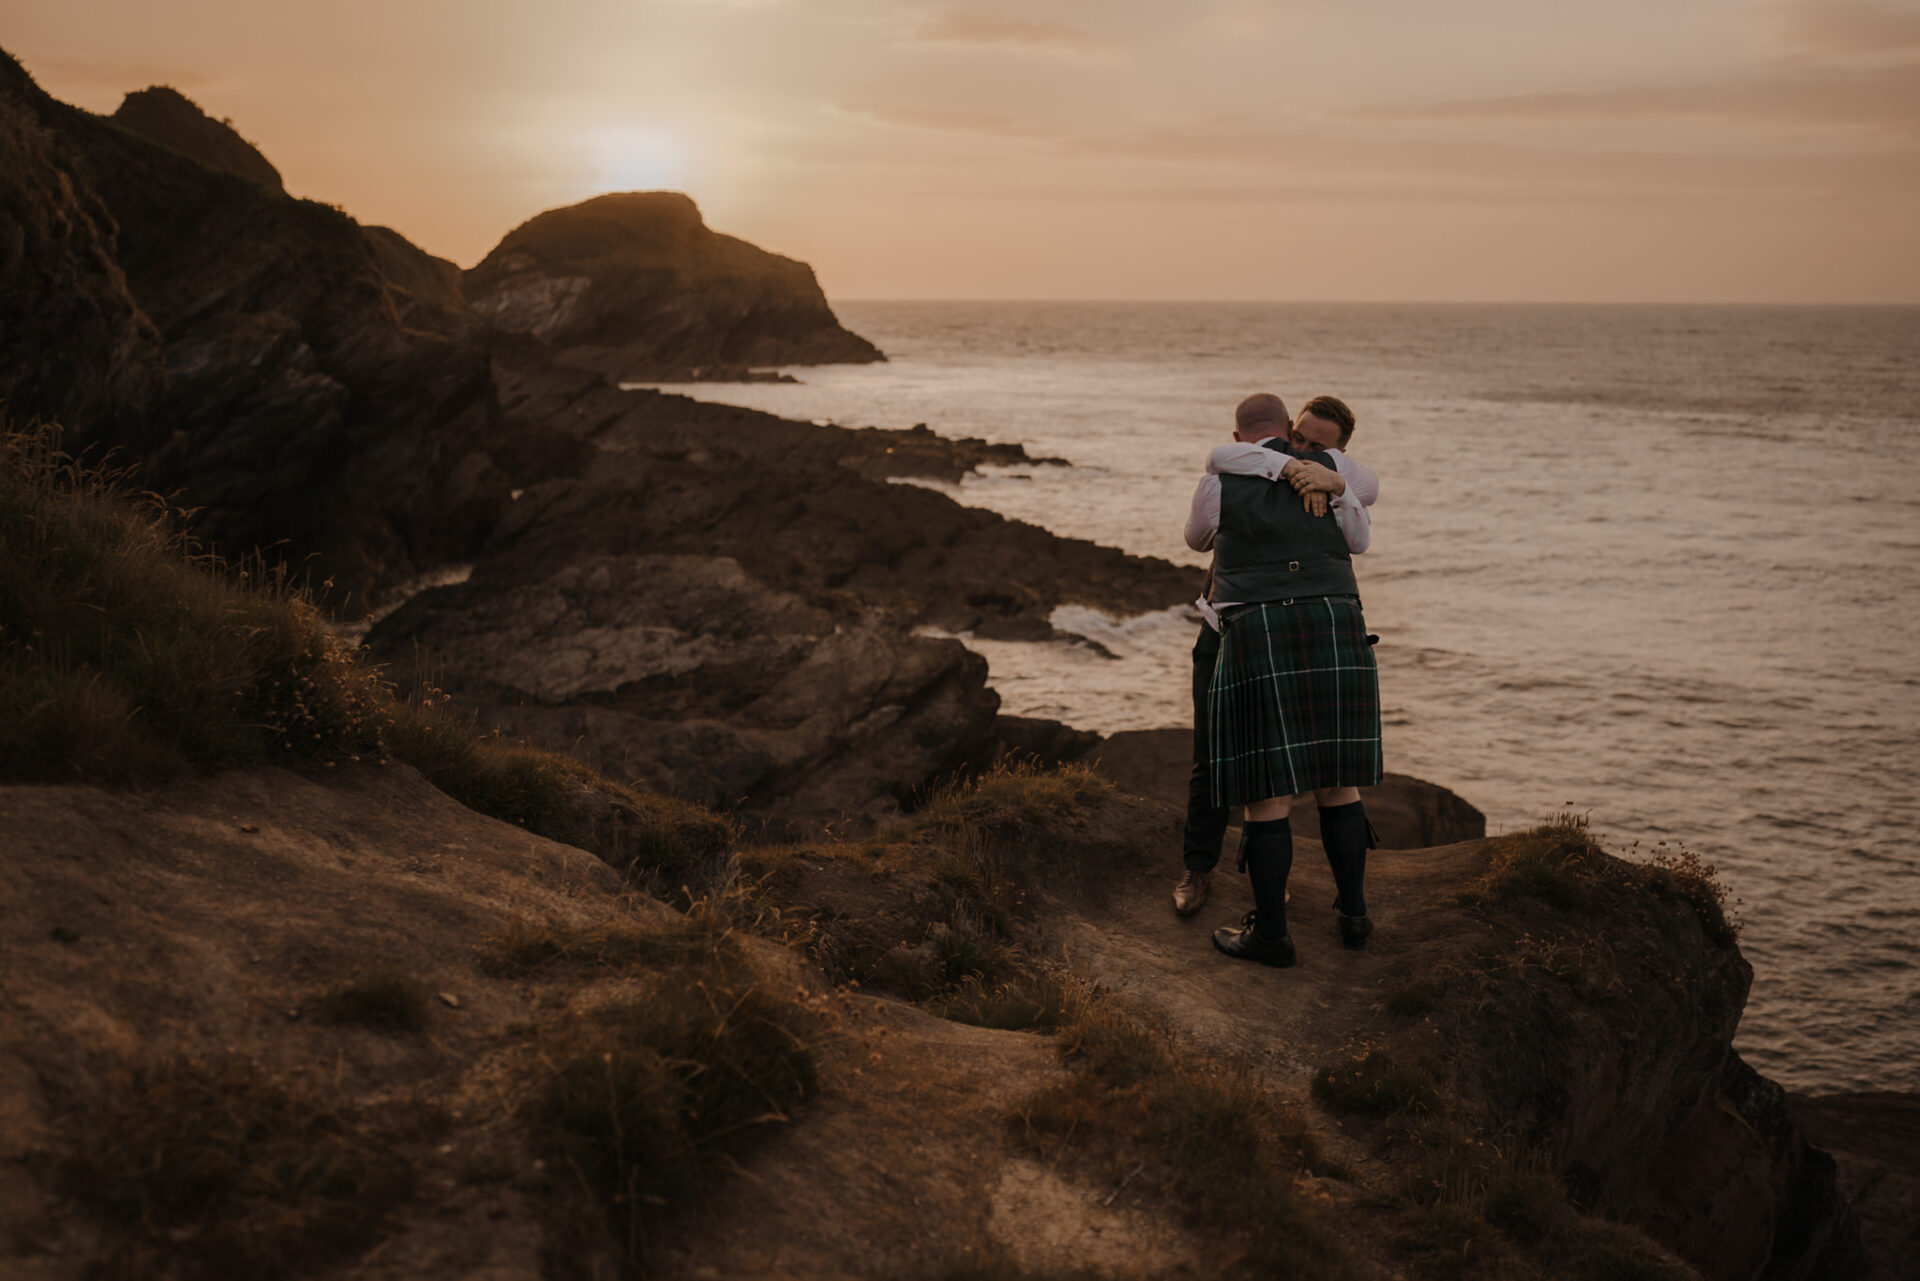 Two people in kilts embracing by the rocky coast at sunset, with the ocean and cliffs in the background, reminiscent of a wedding collection.